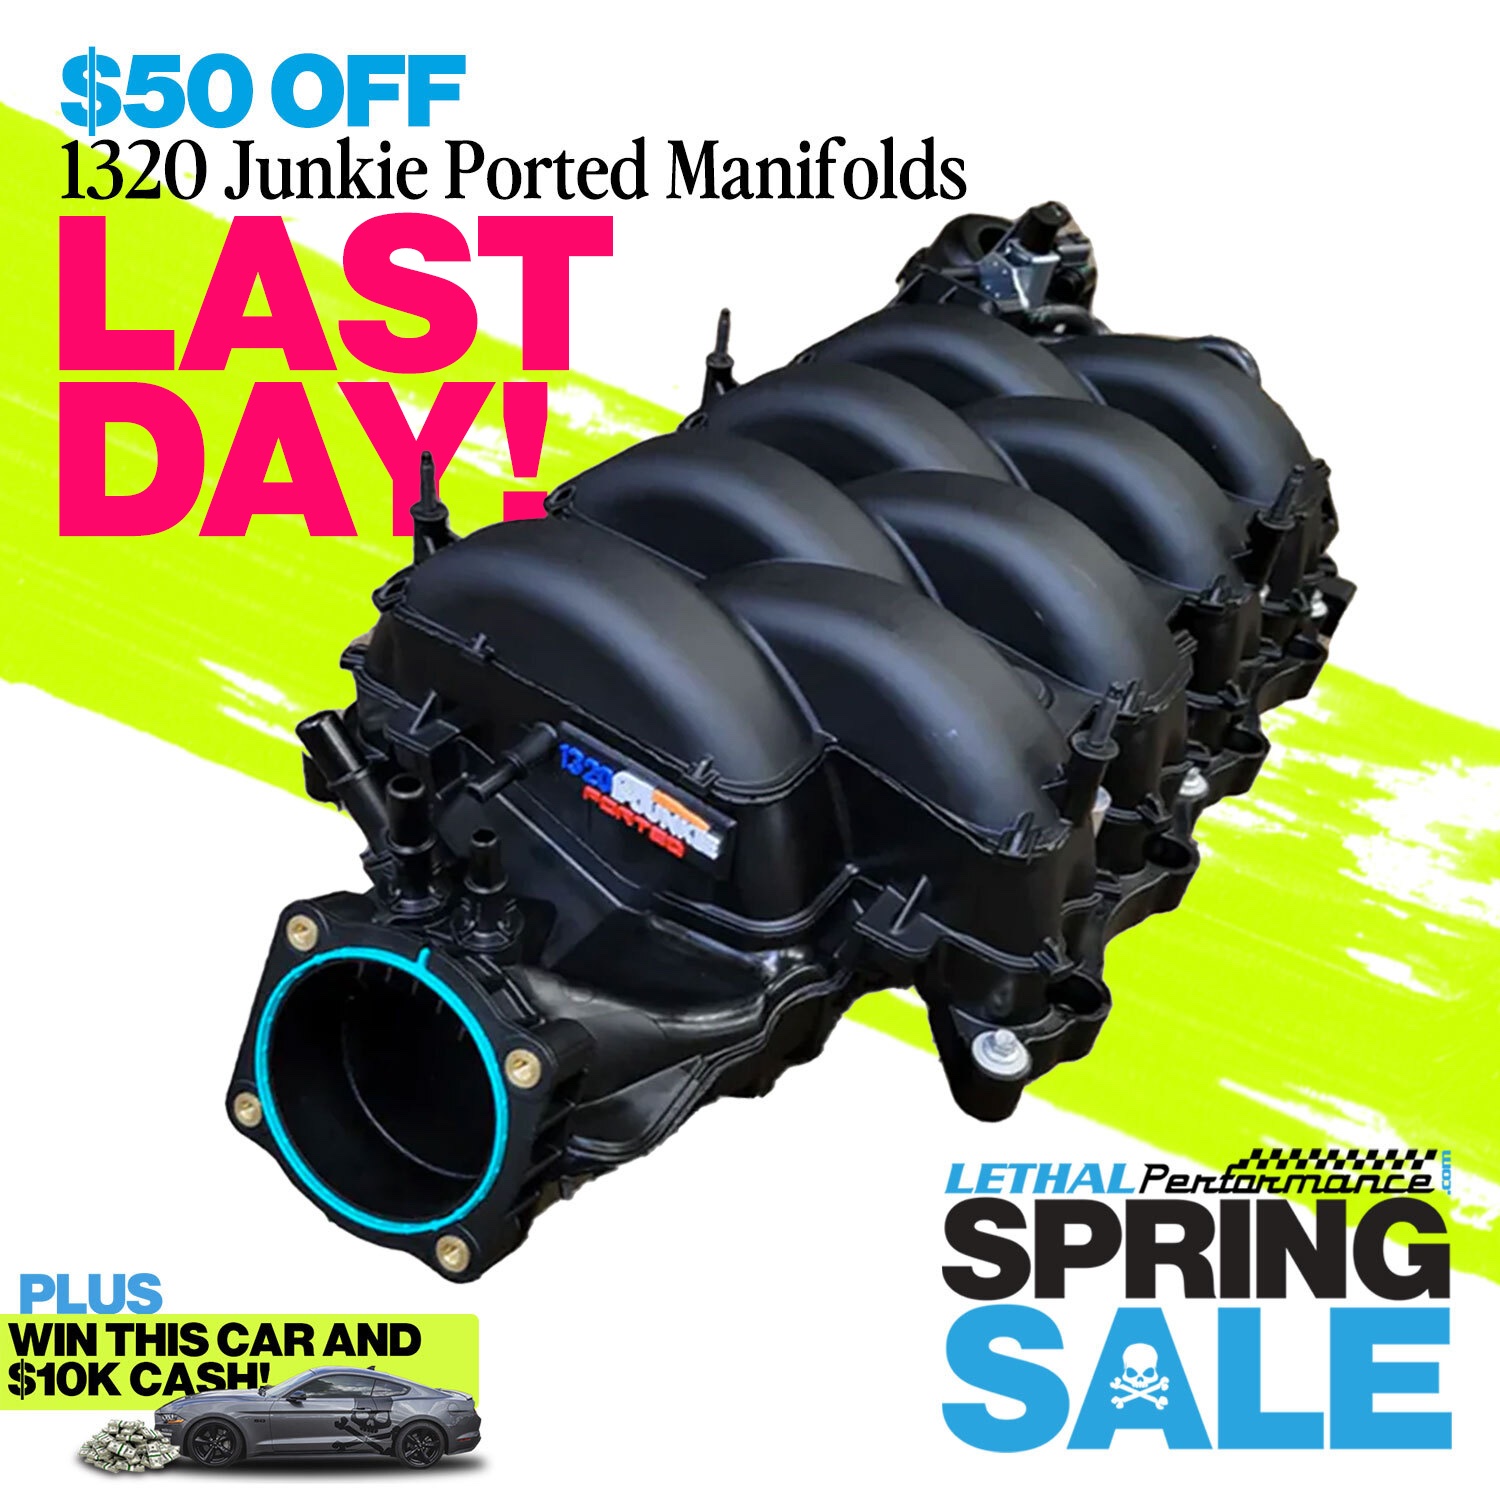 S650 Mustang Spring SALE has SPRUNG here at Lethal Performance!! 1320 end soon spring sale